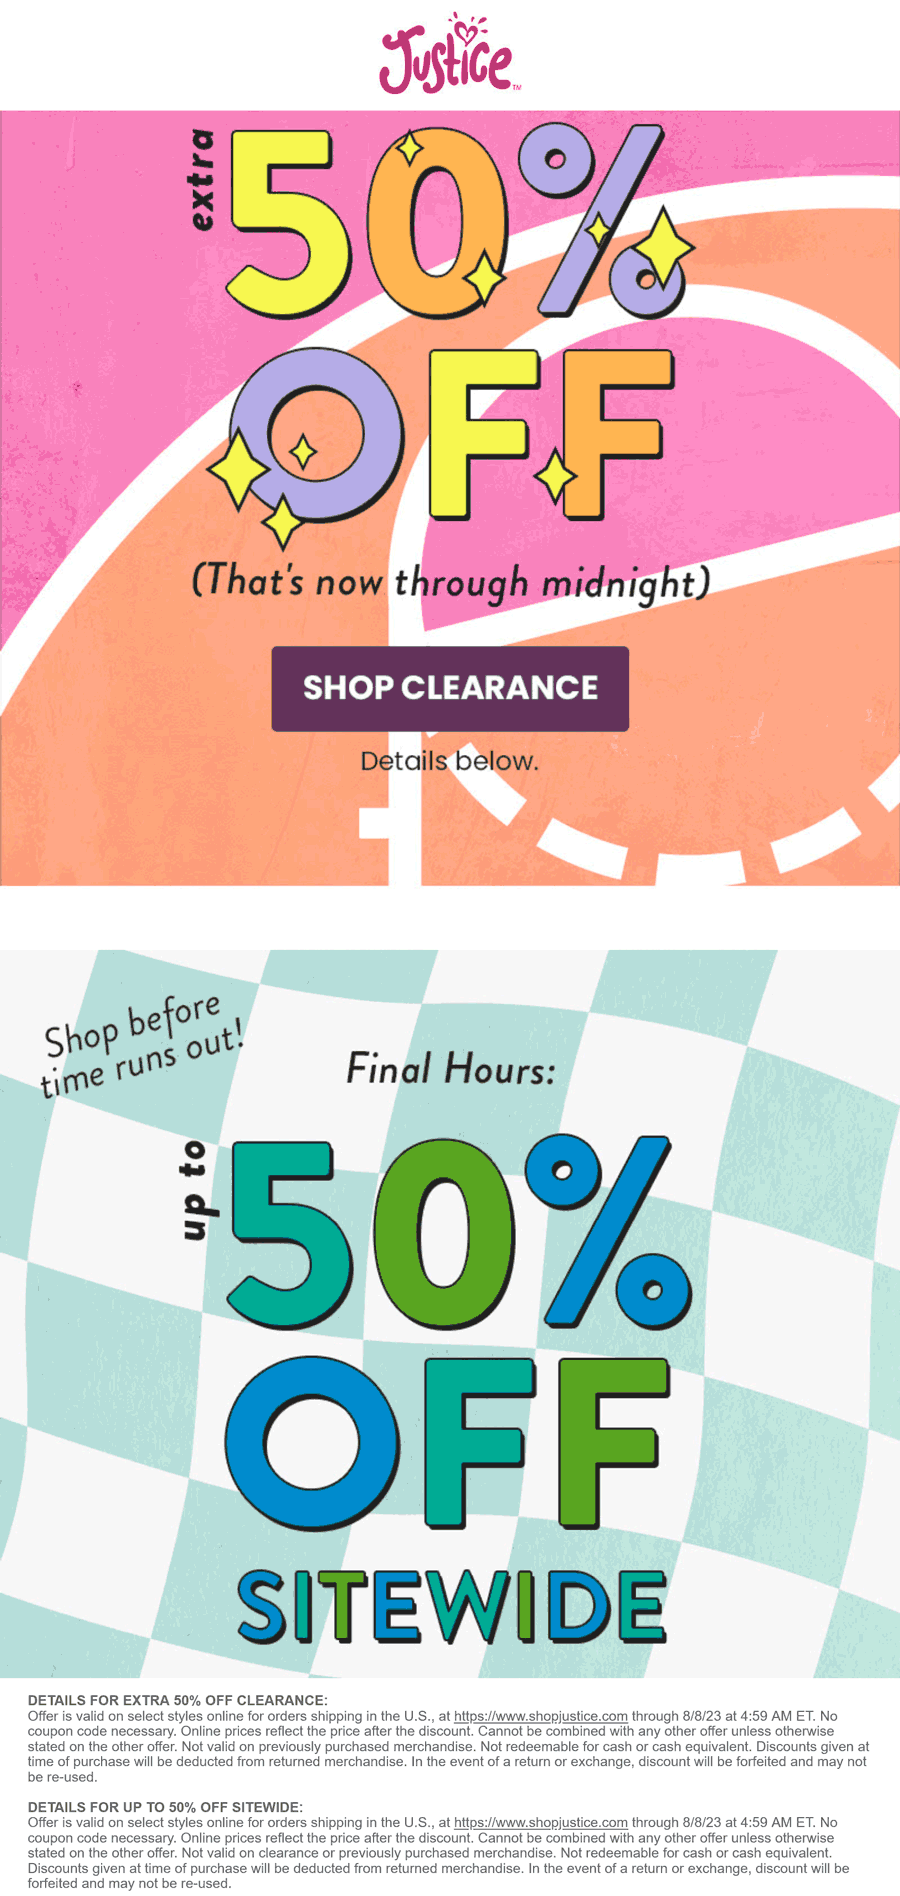 Justice stores Coupon  Extra 50% off clearance online today at Justice #justice 